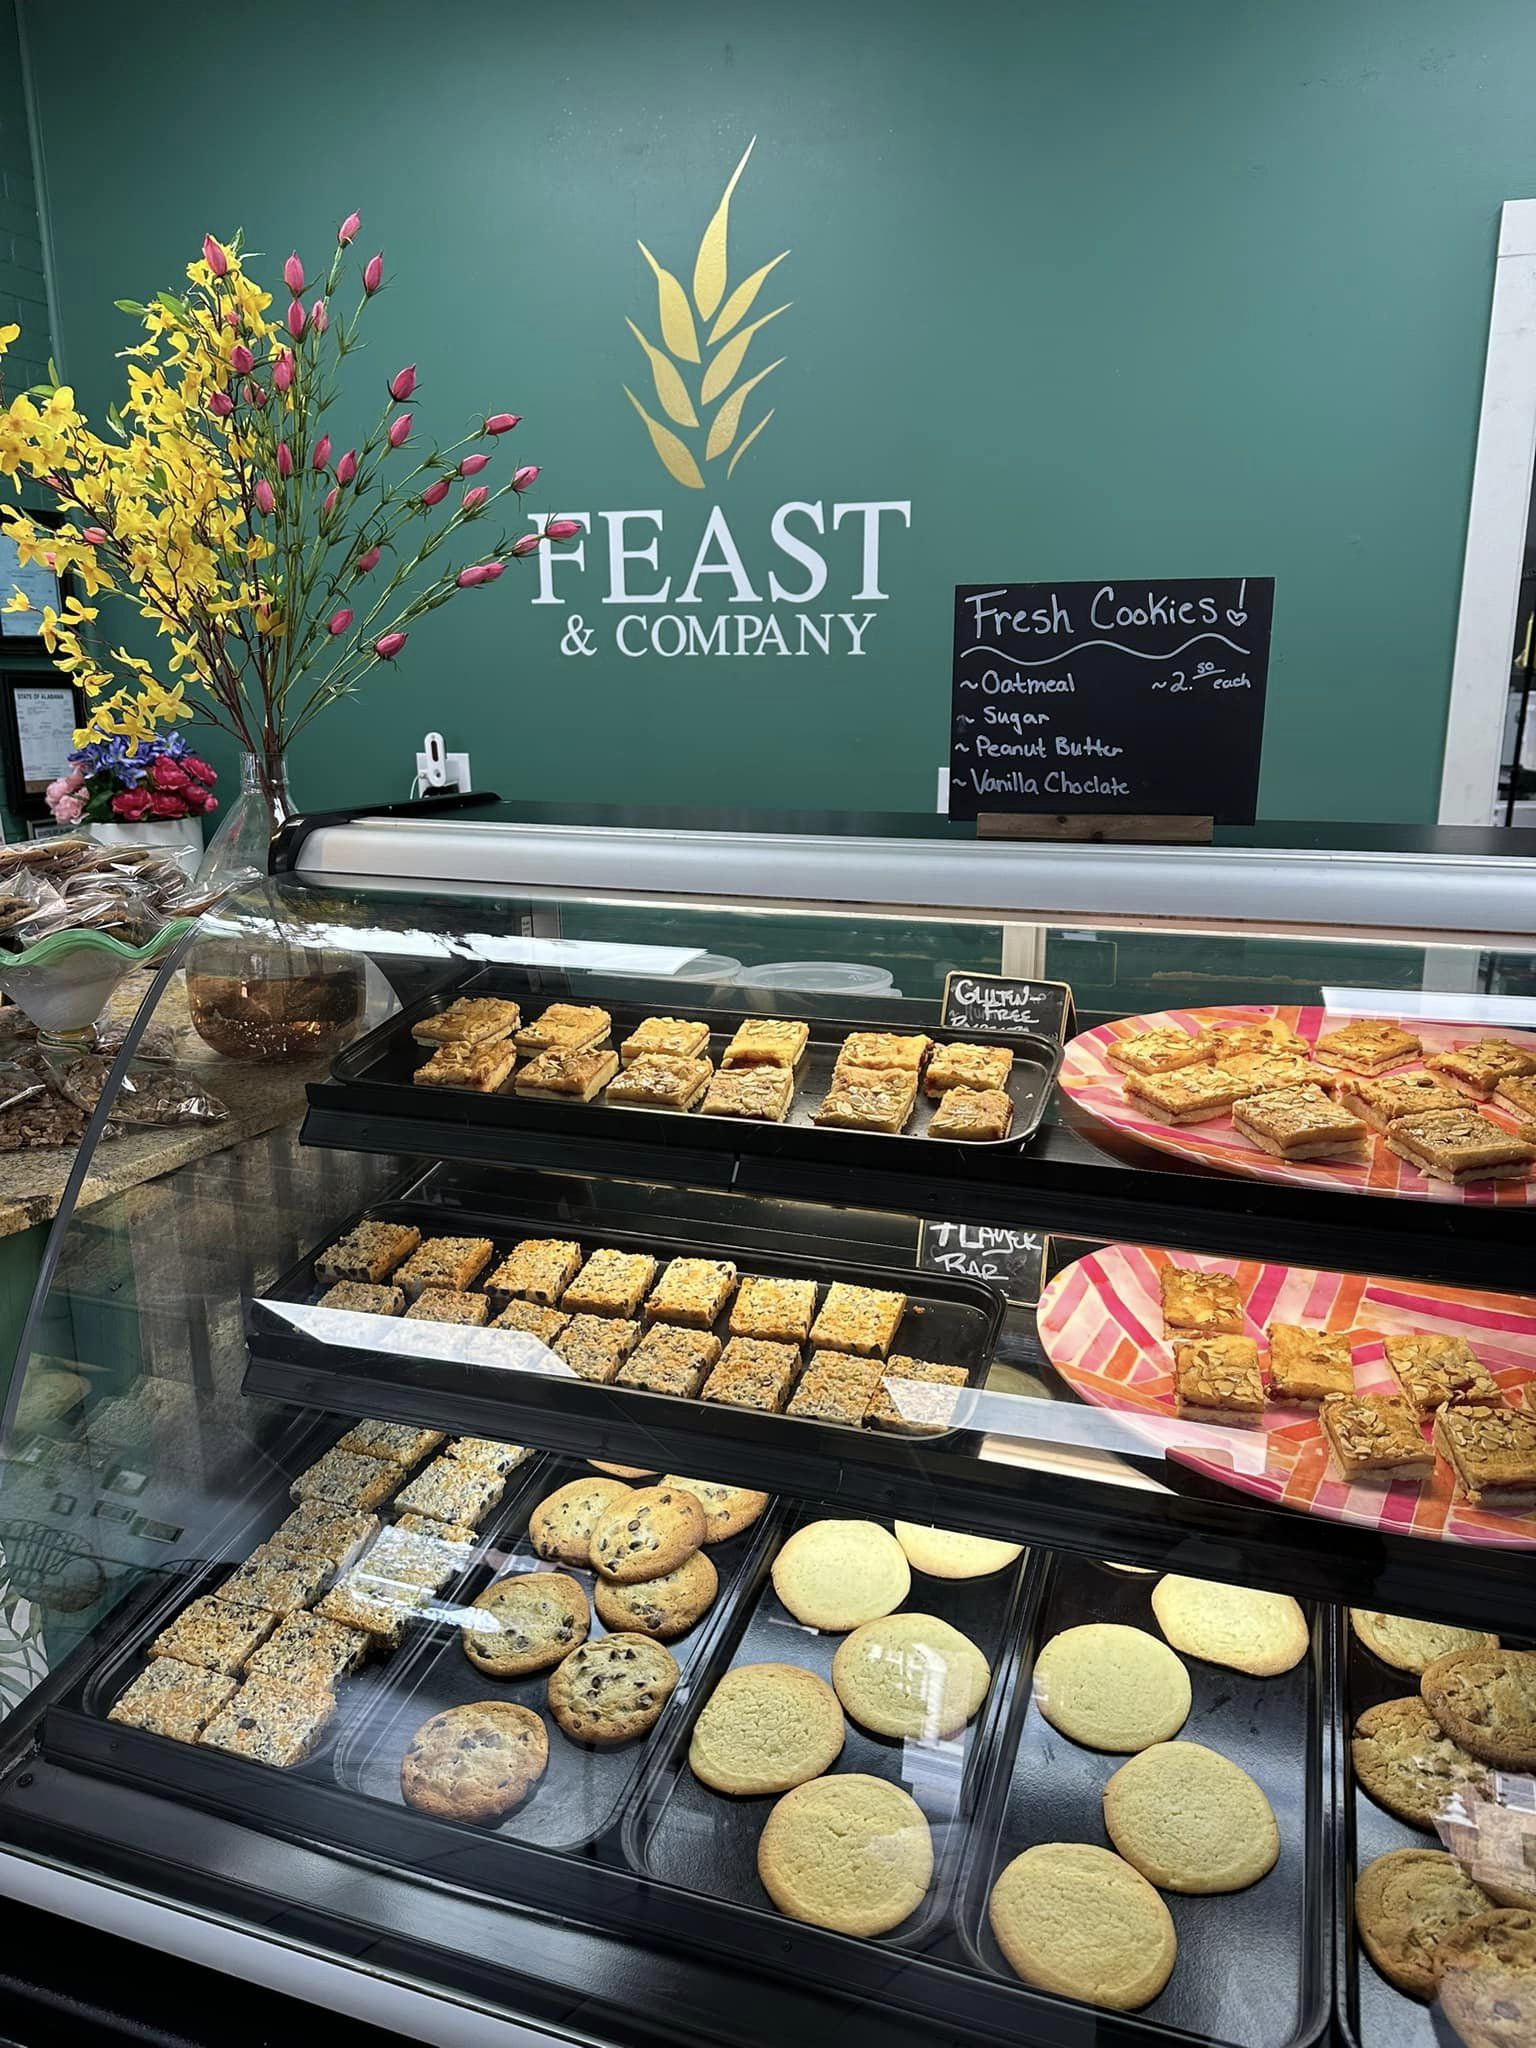 Feast Co. Catering